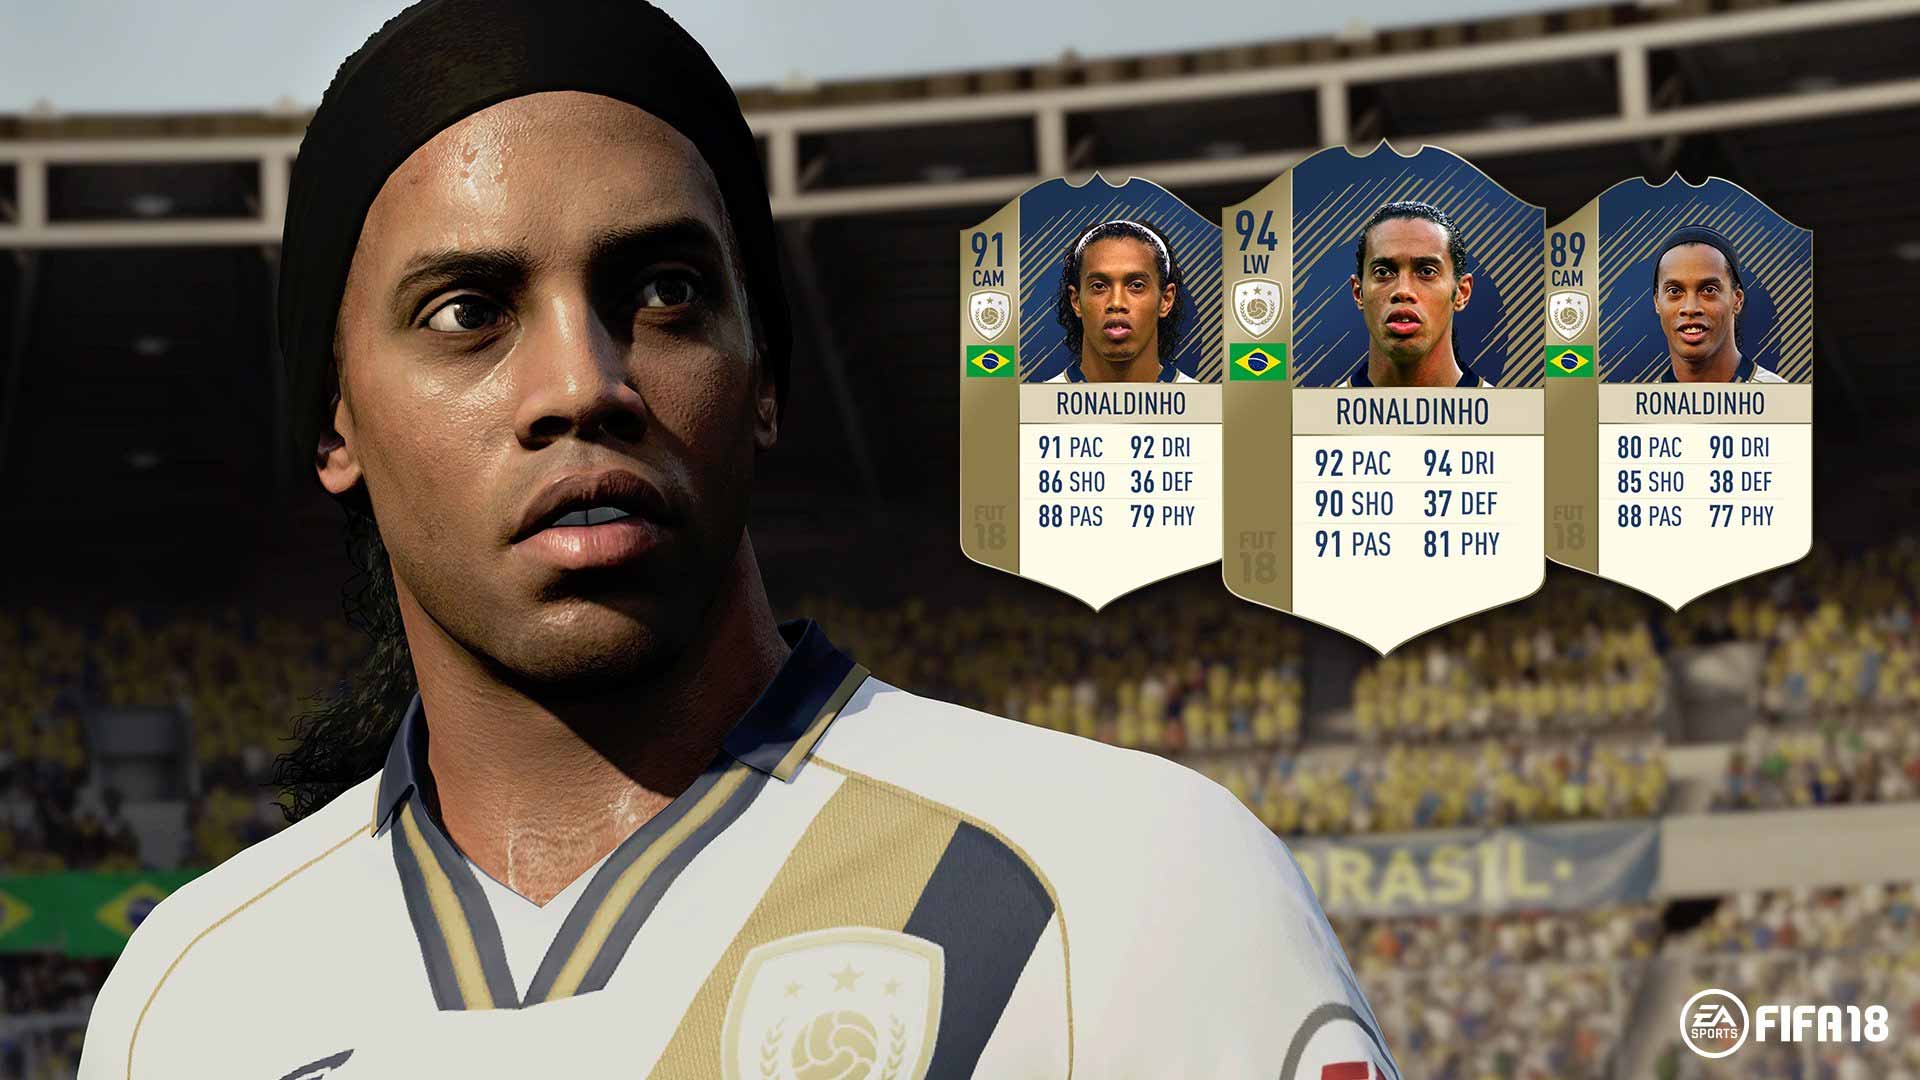 Screenshots the Official FIFA 18 Image